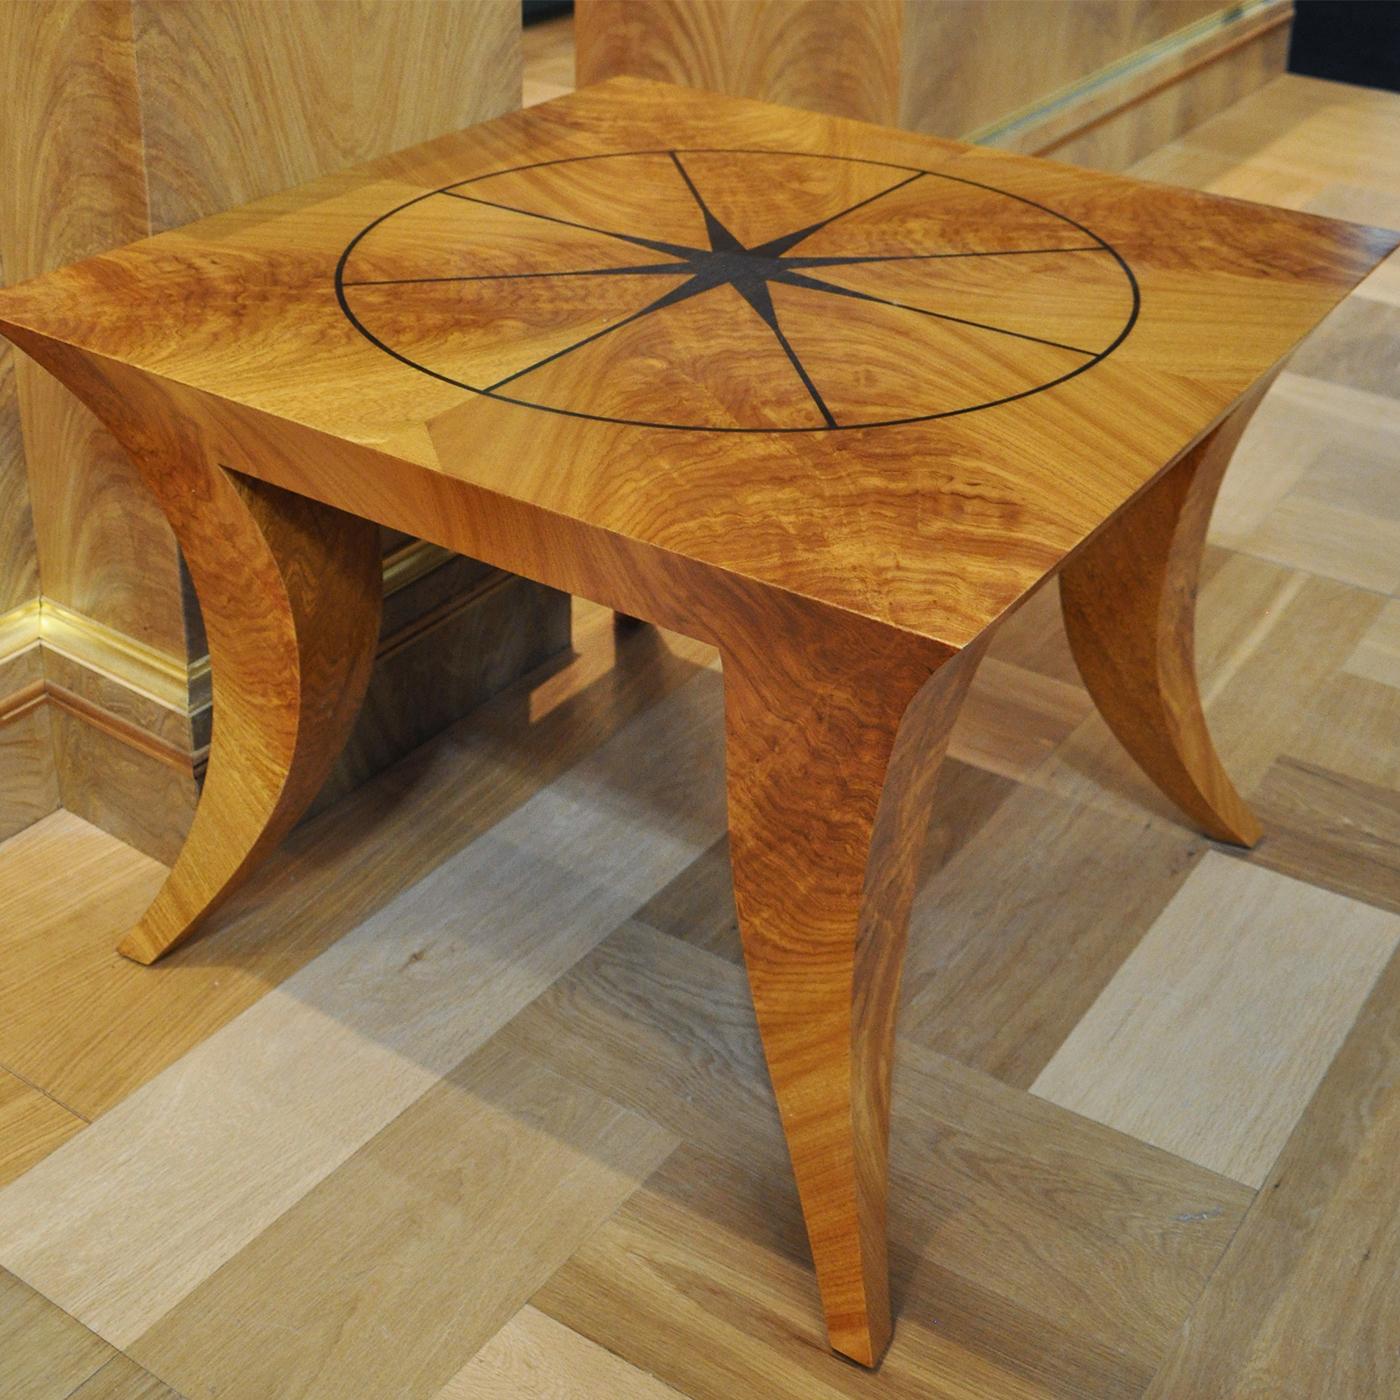 This classy coffee table exudes the indisputable allure of a furniture gem, since it is fashioned from an ultra-rare timber - Cerejeira crotch wood. Its dynamic shape combines thick plans and full volumes, including the sculptural legs shaped like